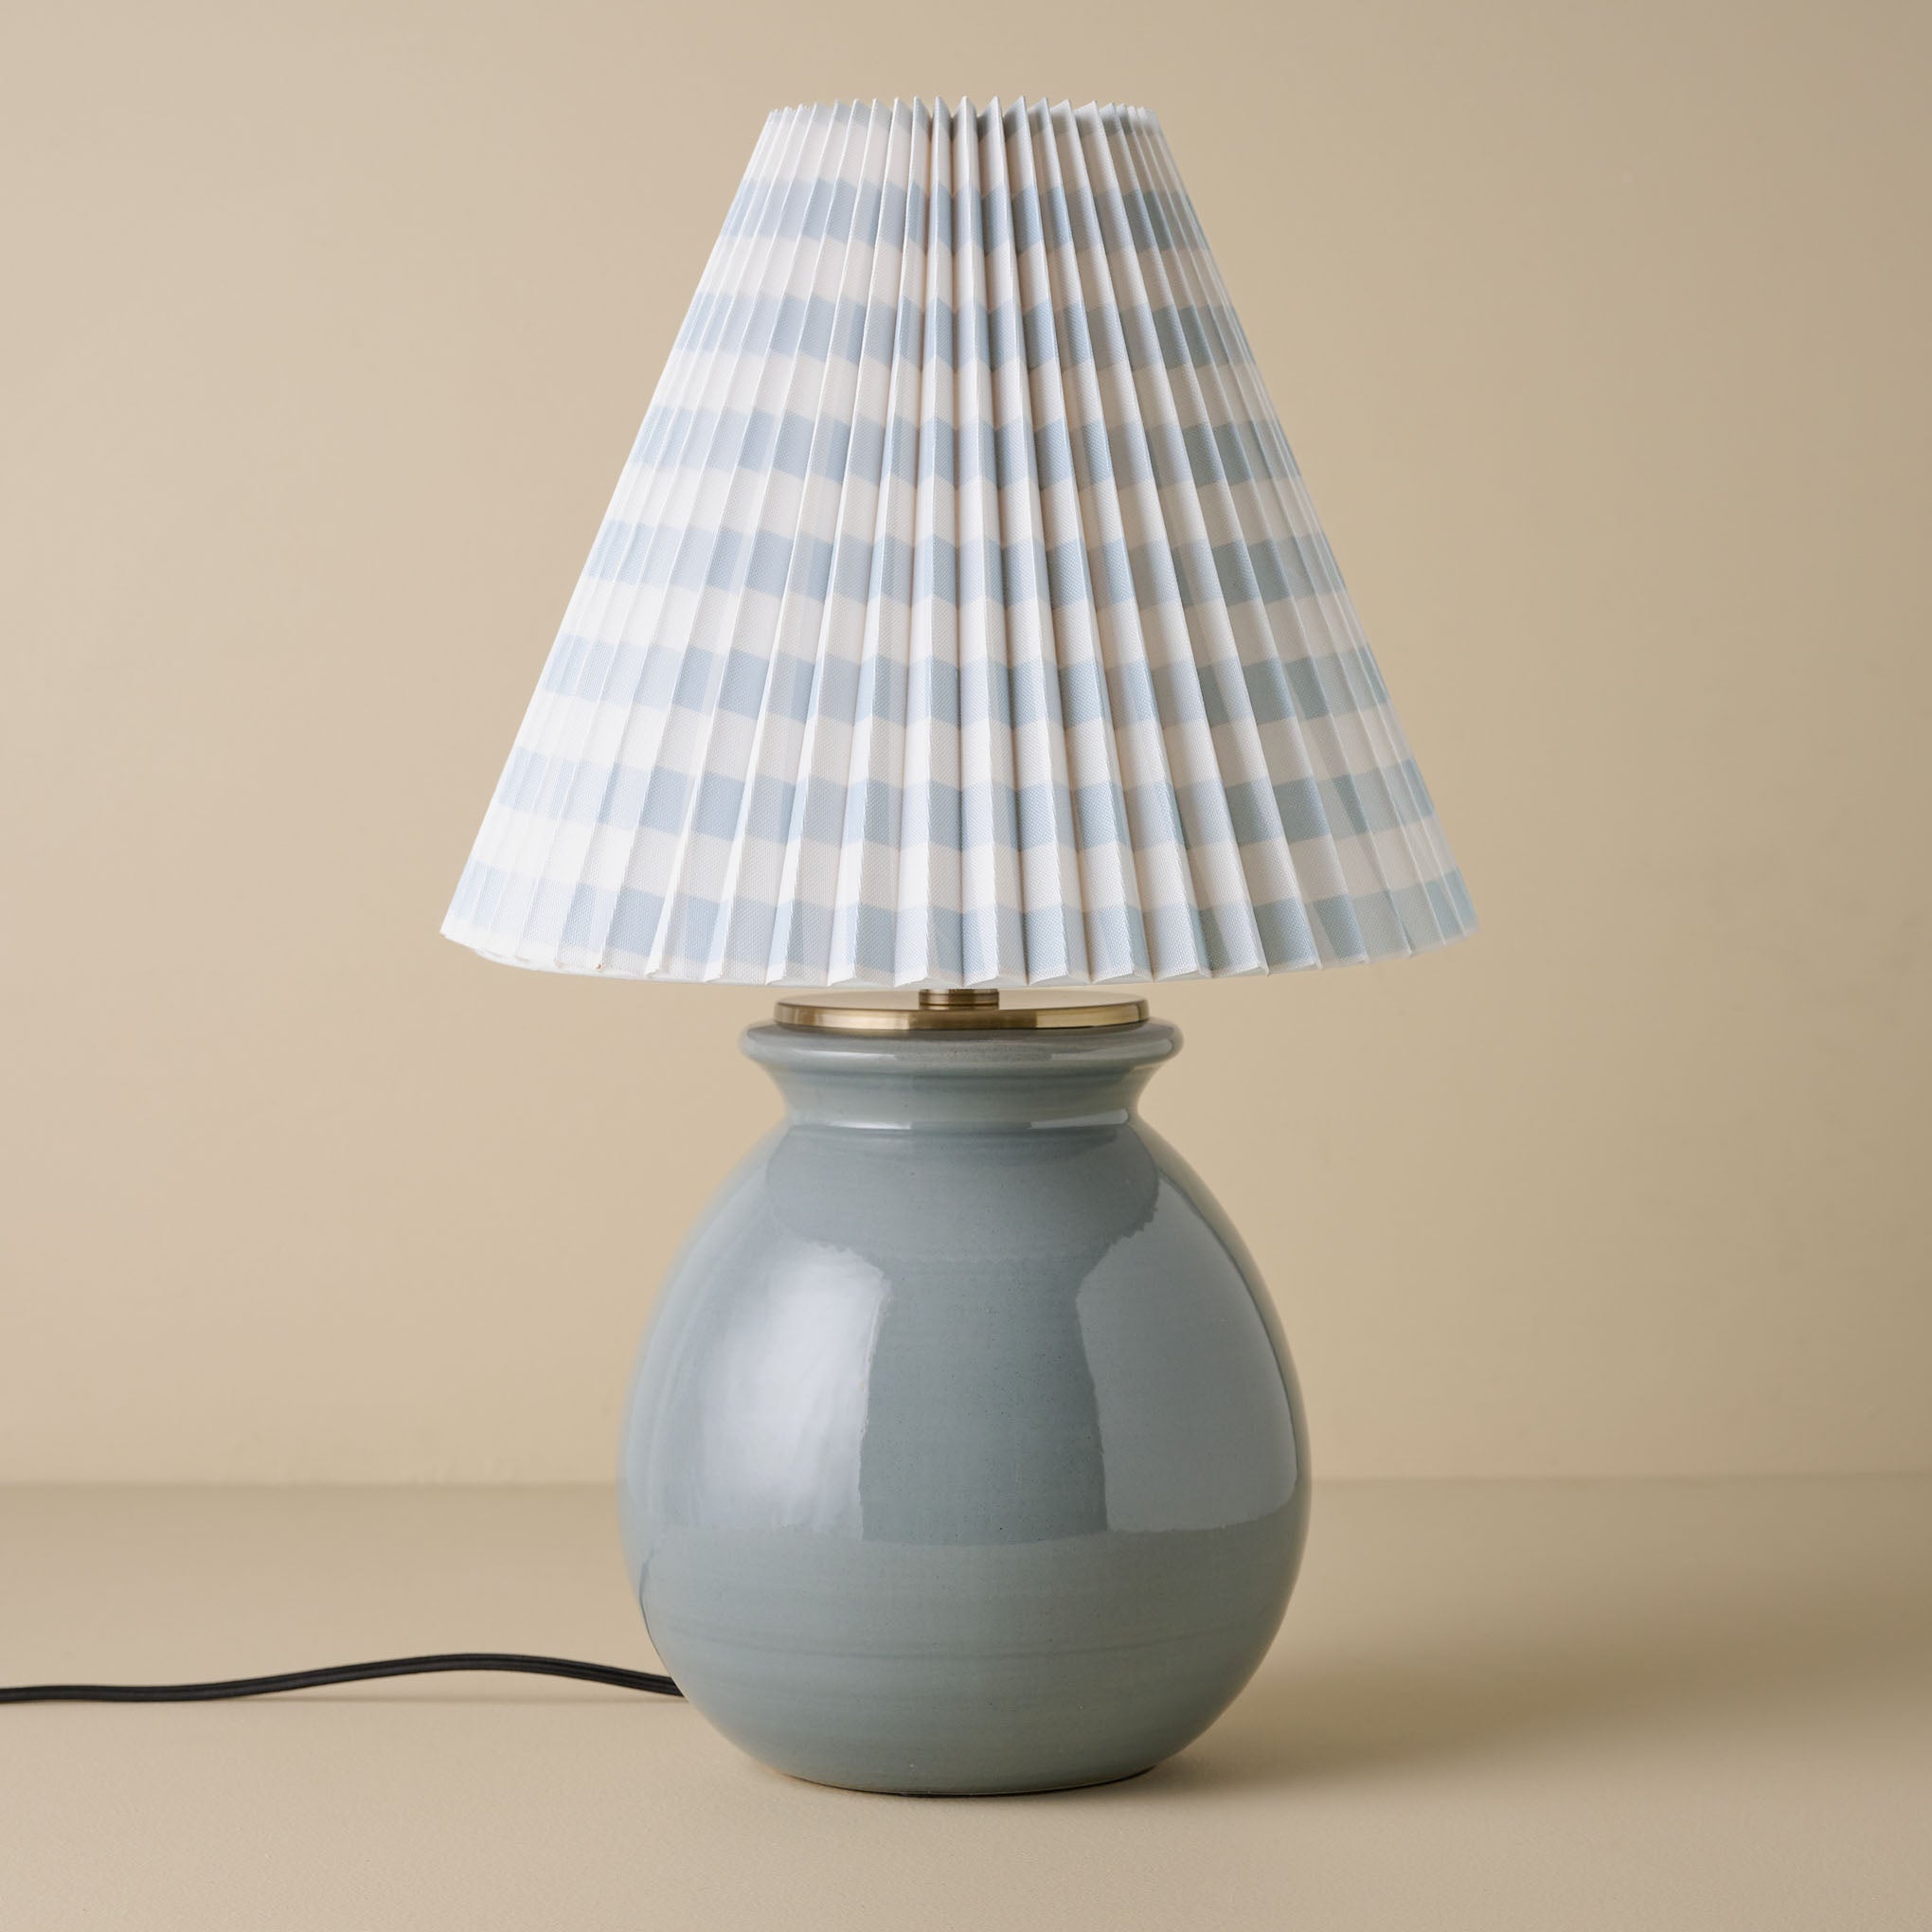 Olivia Table Lamp - Lake Blue with blue gingham lamp shade